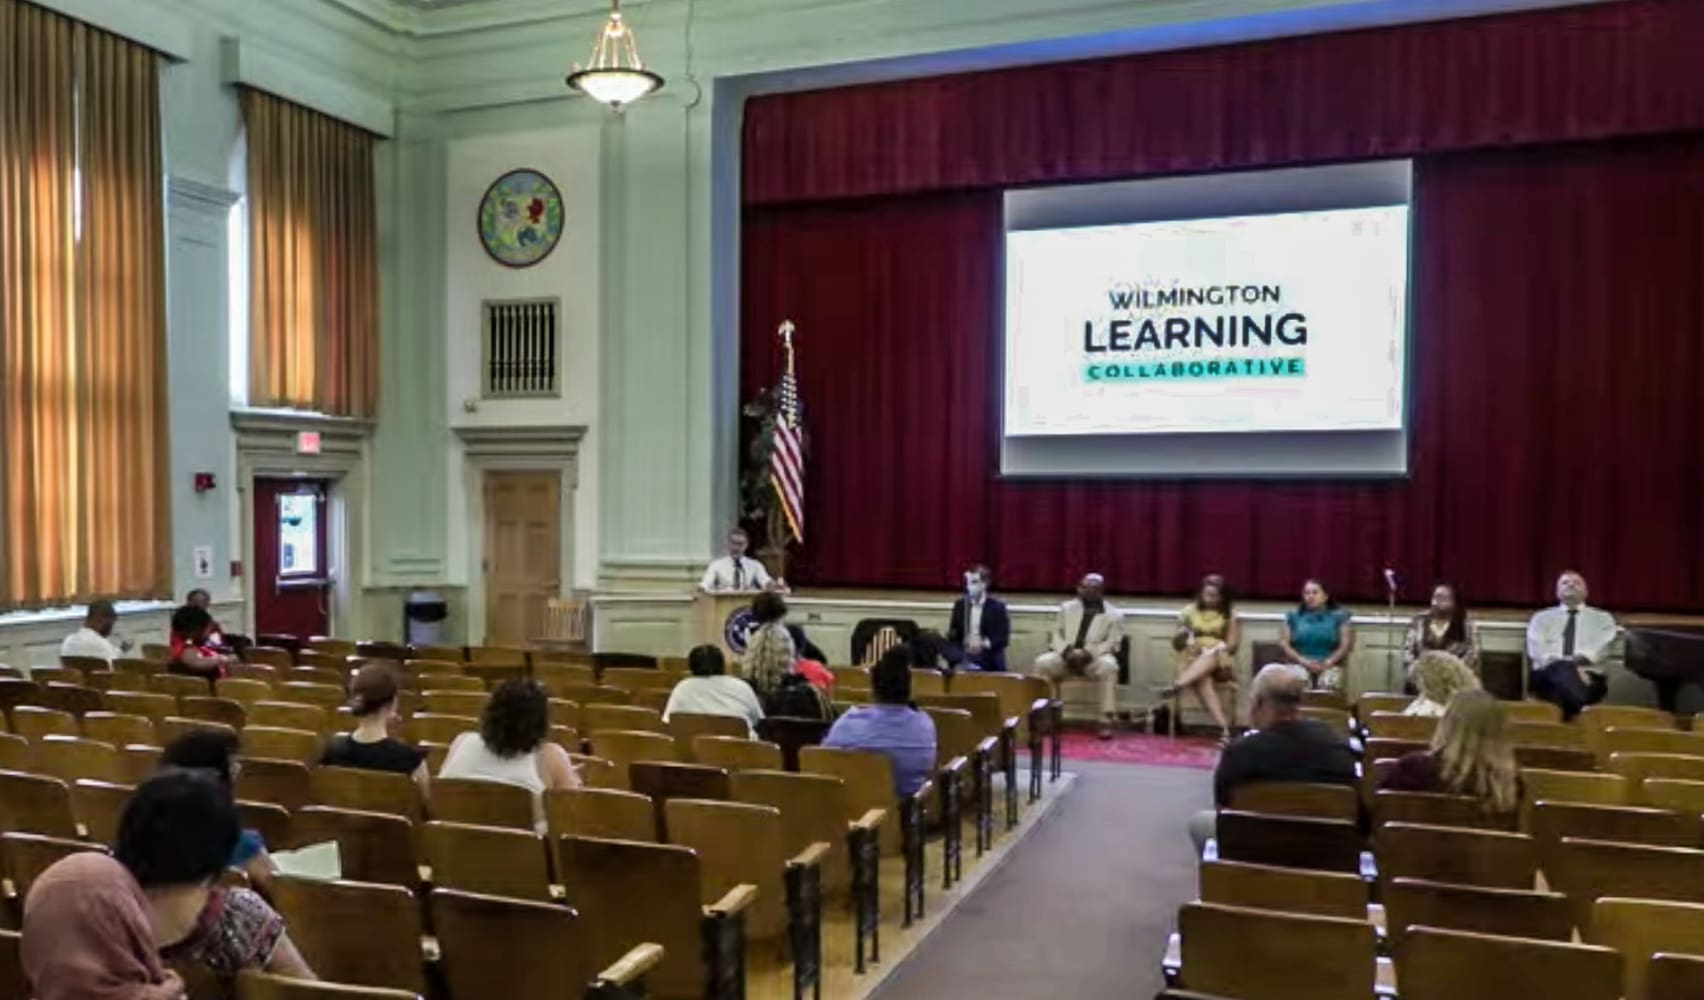 Brandywine School District becomes the second district to join the Wilmington Learning Collaborative.